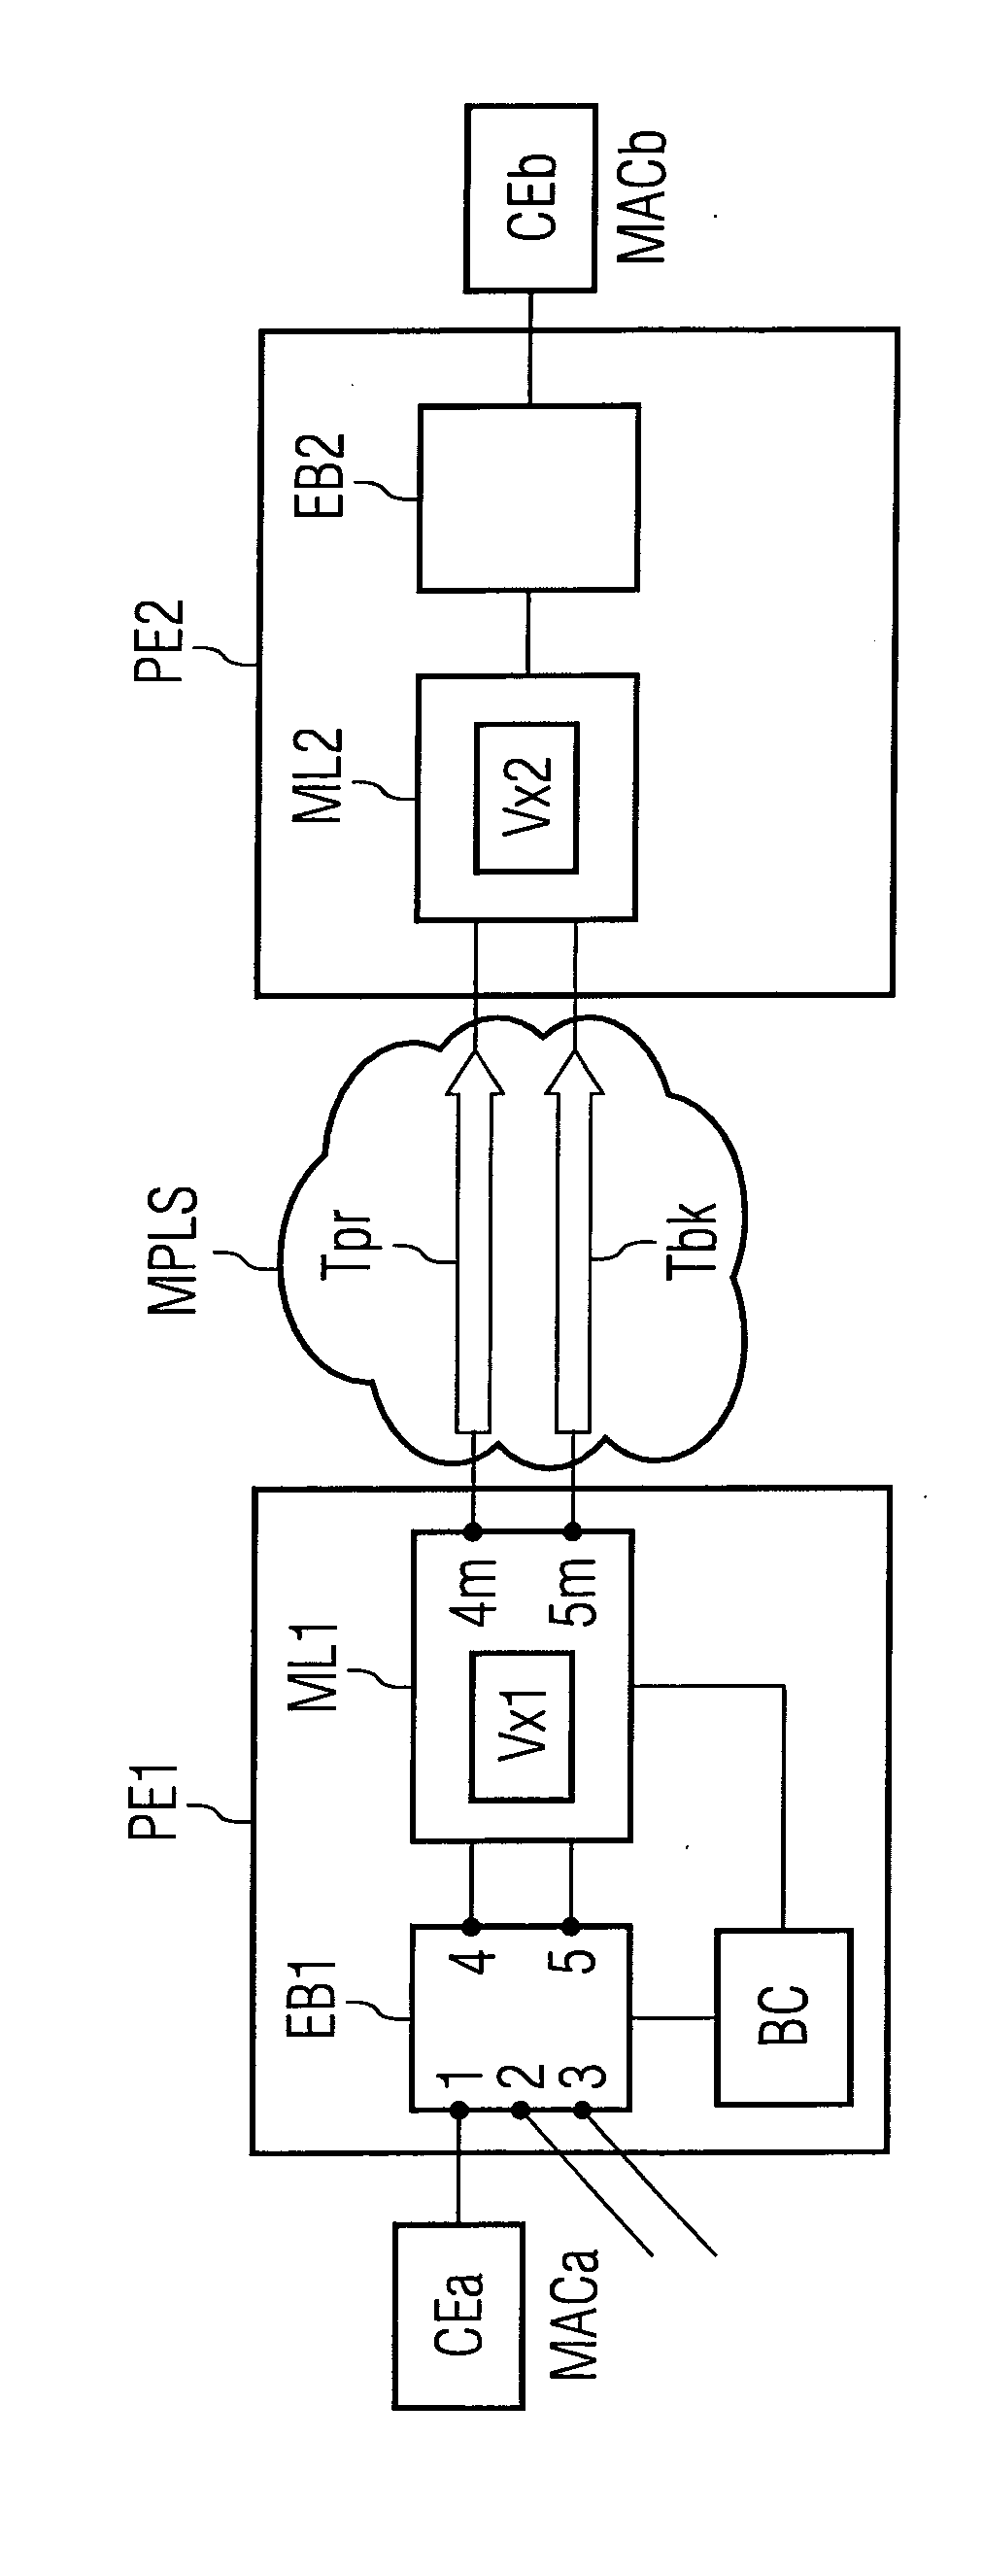 Automatic packet protection forwarding to an mpls network by a dual-homed  ethernet bridge